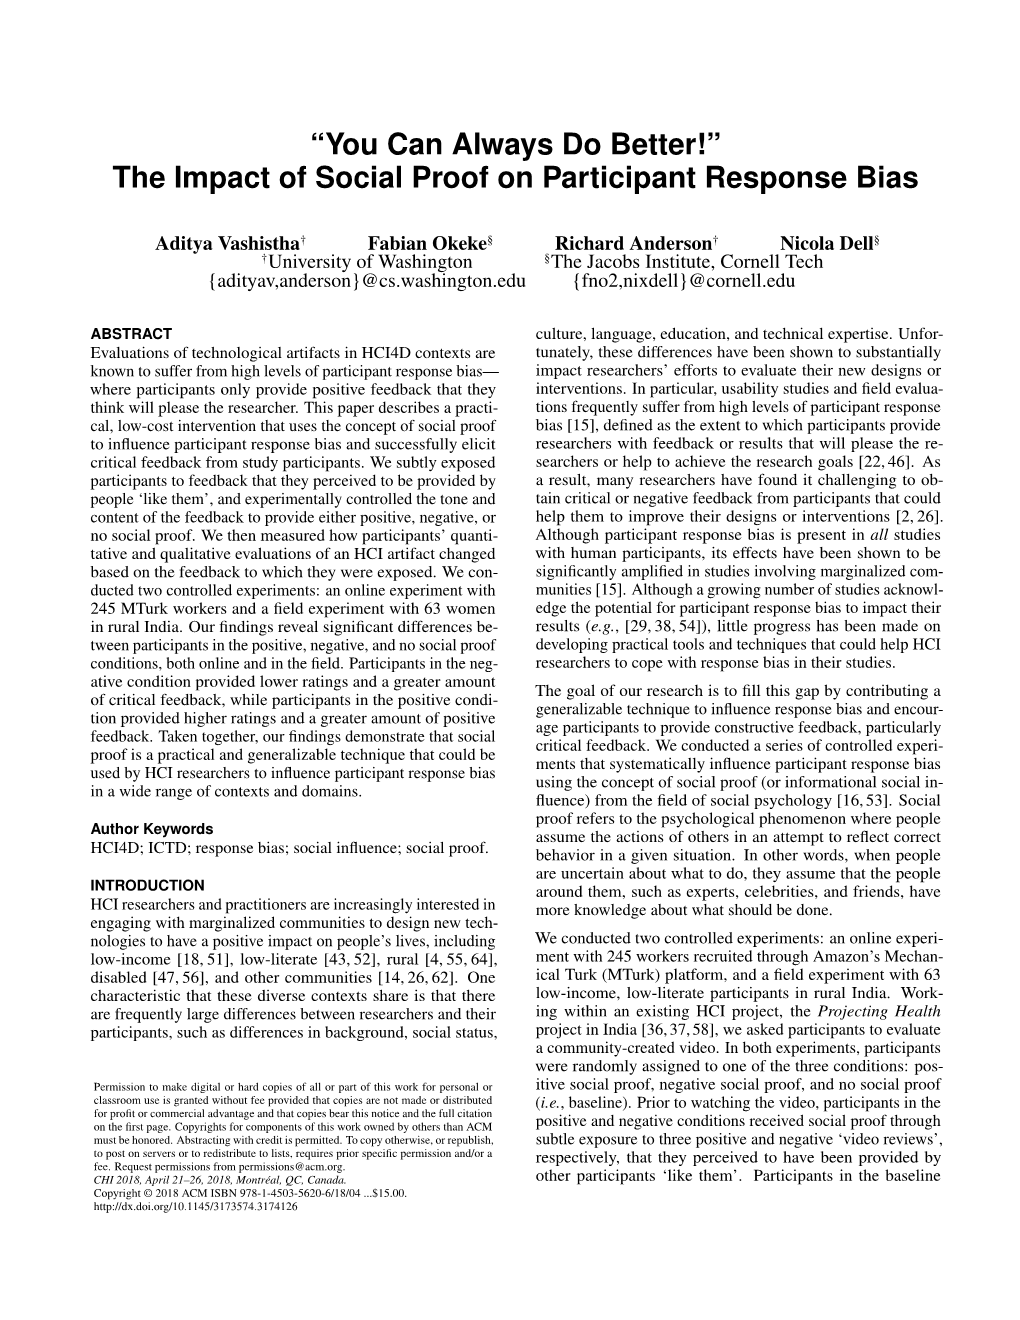 The Impact of Social Proof on Participant Response Bias